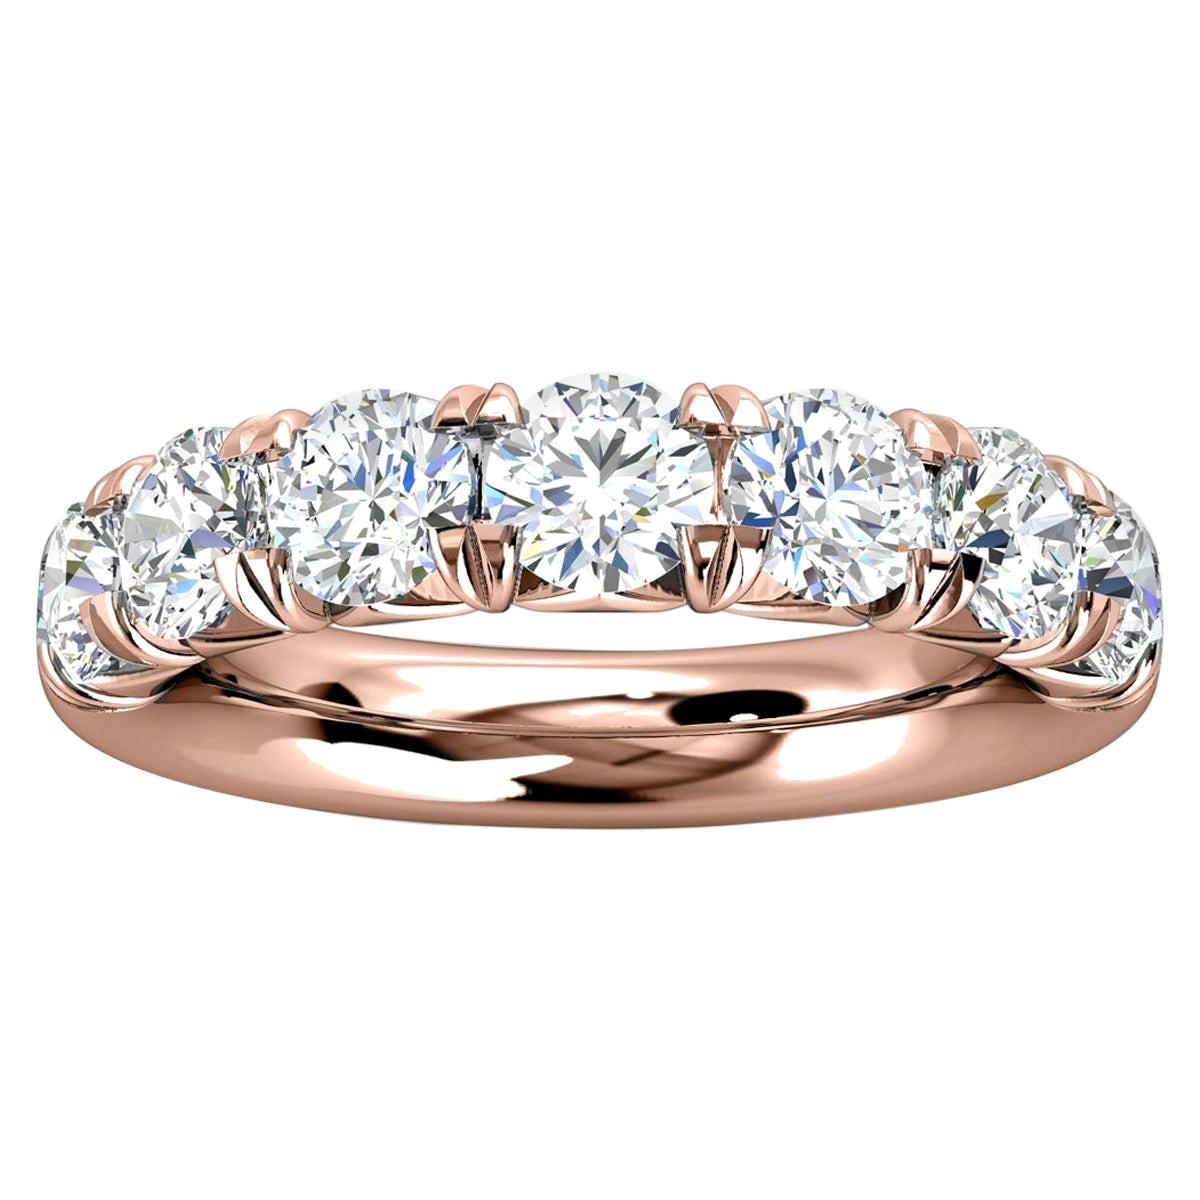 For Sale:  14k Rose Gold Voyage French Pave Diamond Ring '2 Ct. Tw'